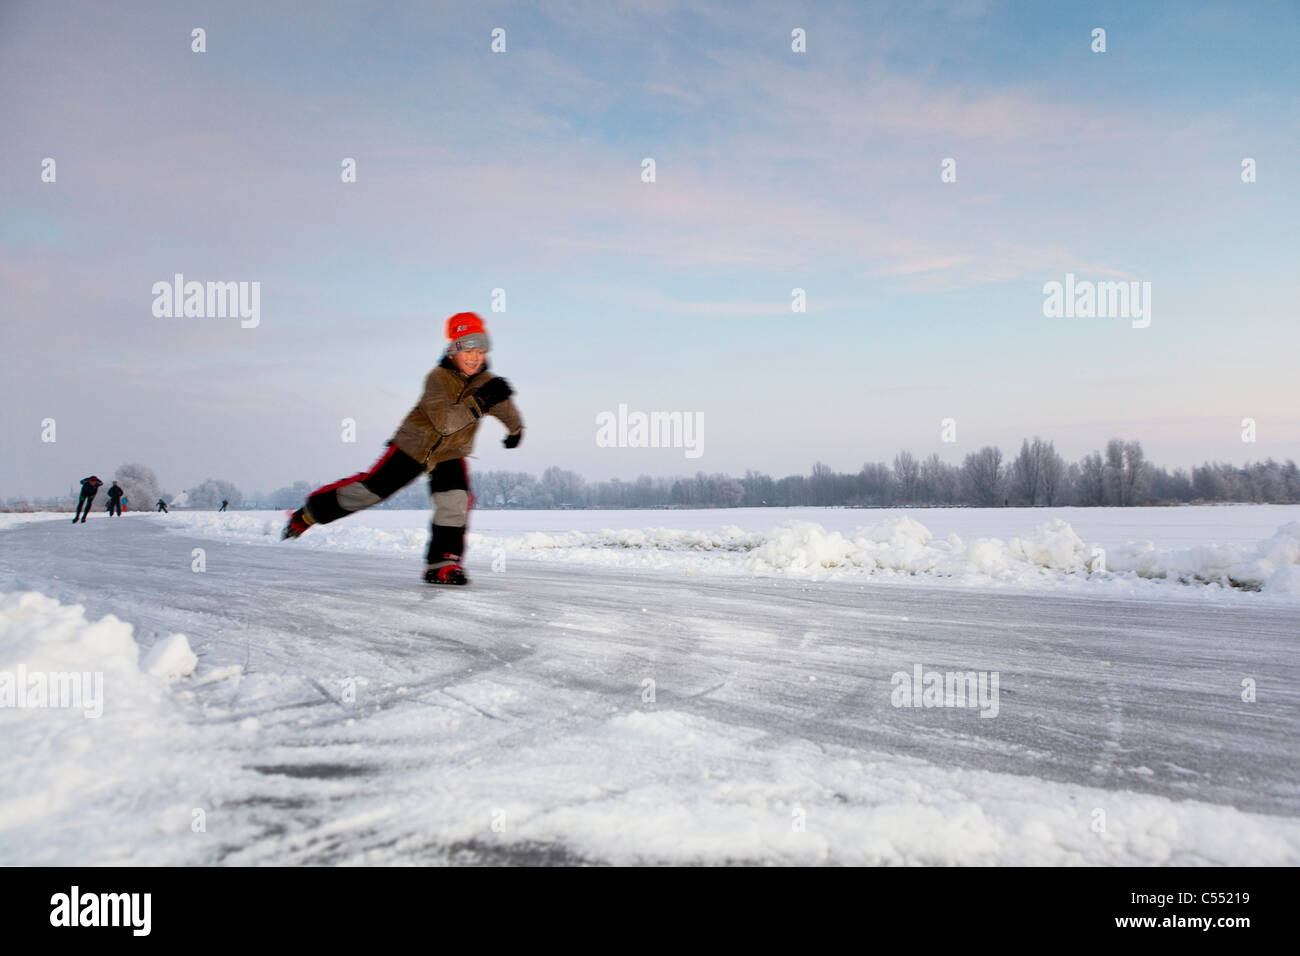 The Netherlands, Gaastmeer, Skating on frozen lake in frost and snow landscape. Stock Photo